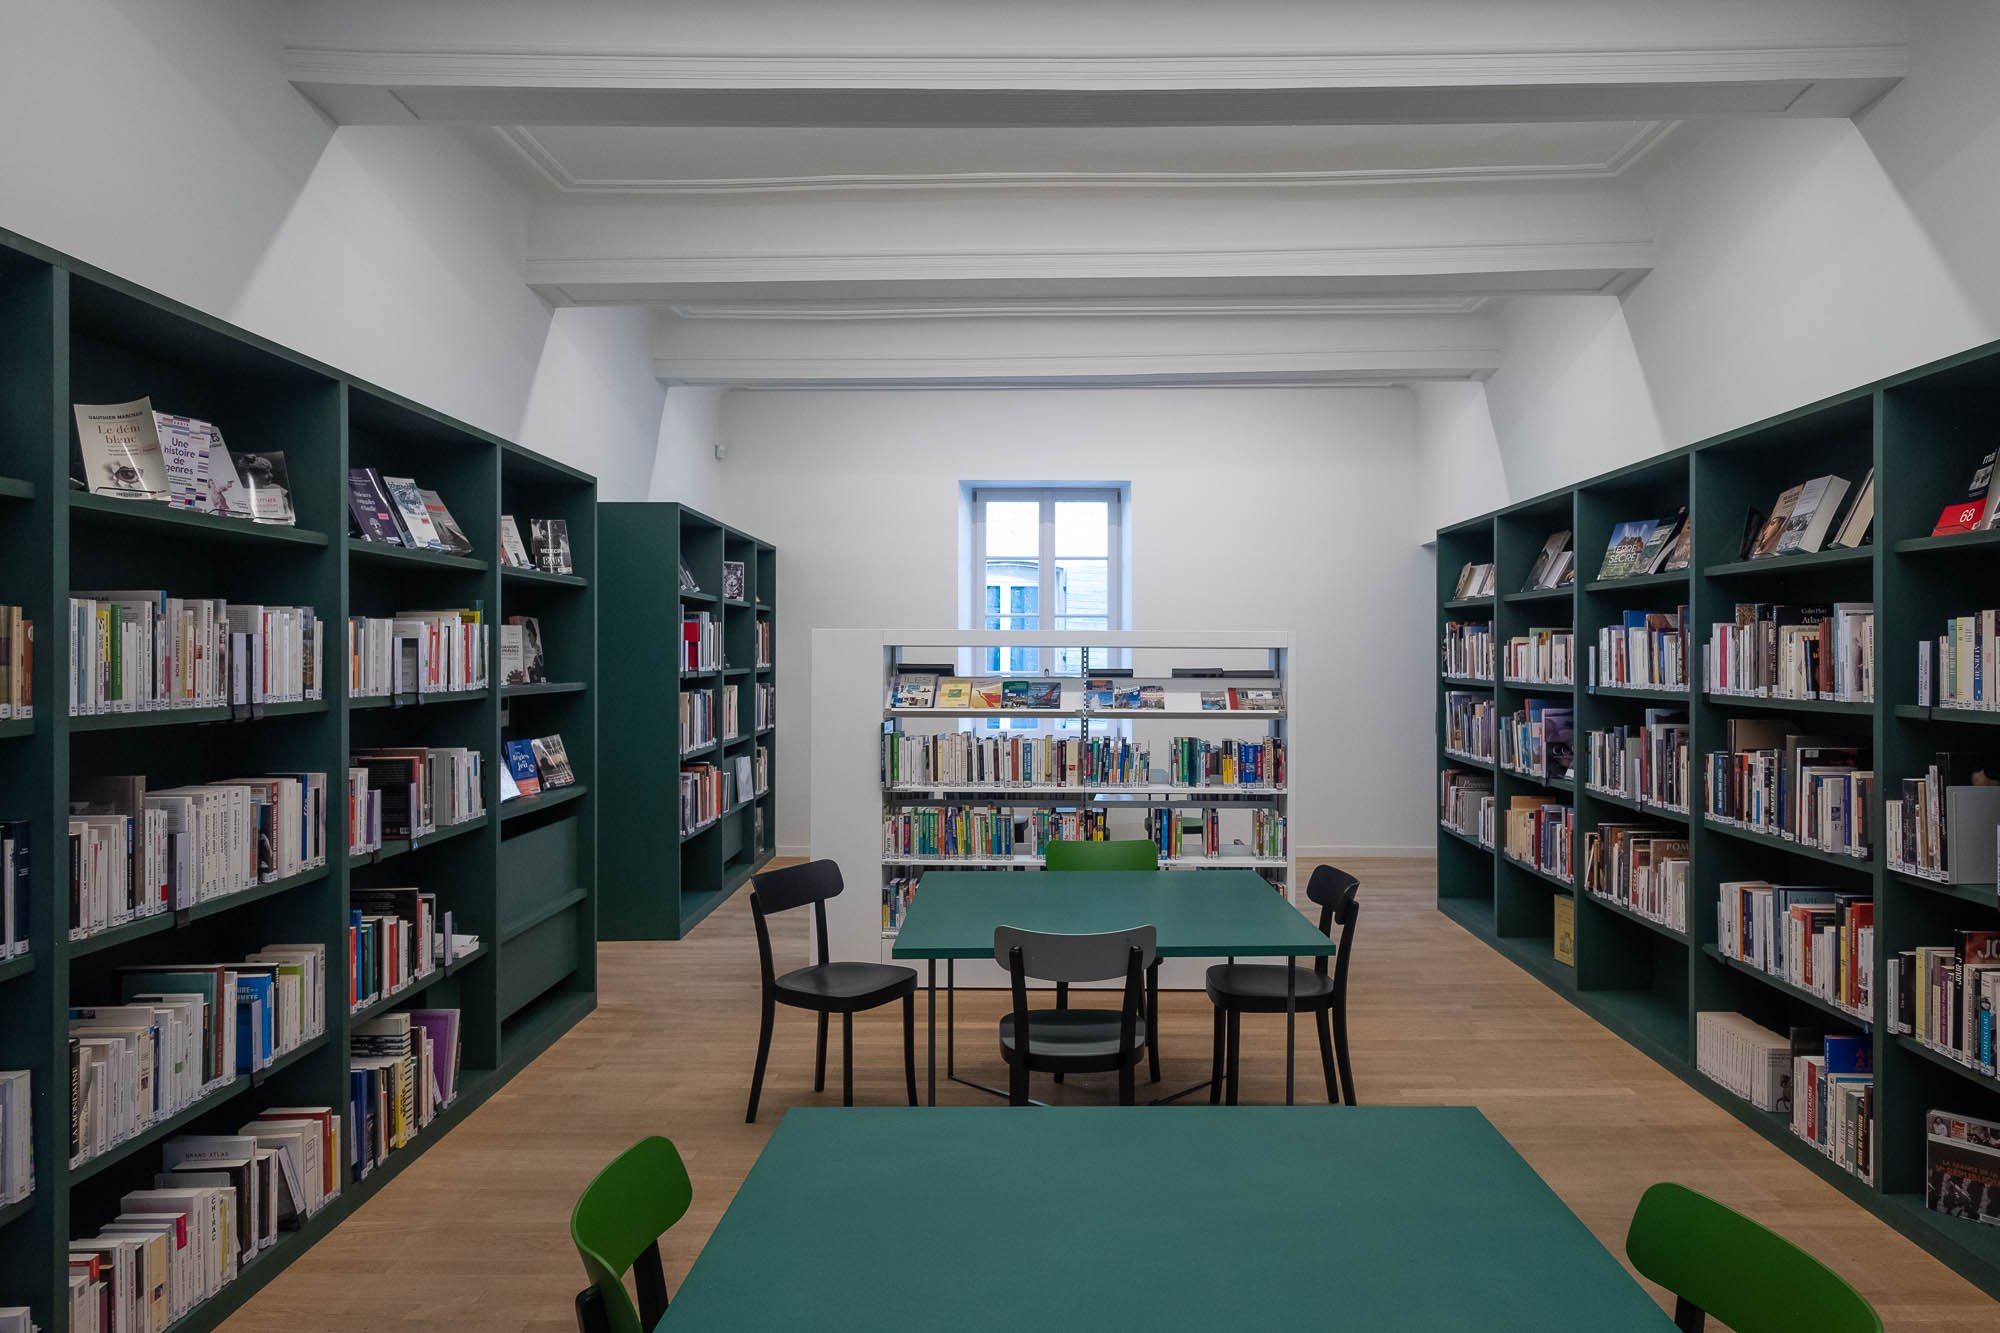 Interior of an old house converted to a library. Dark green bookshelves and tables contrast against white painted walls and ceilings, where beams are visible.